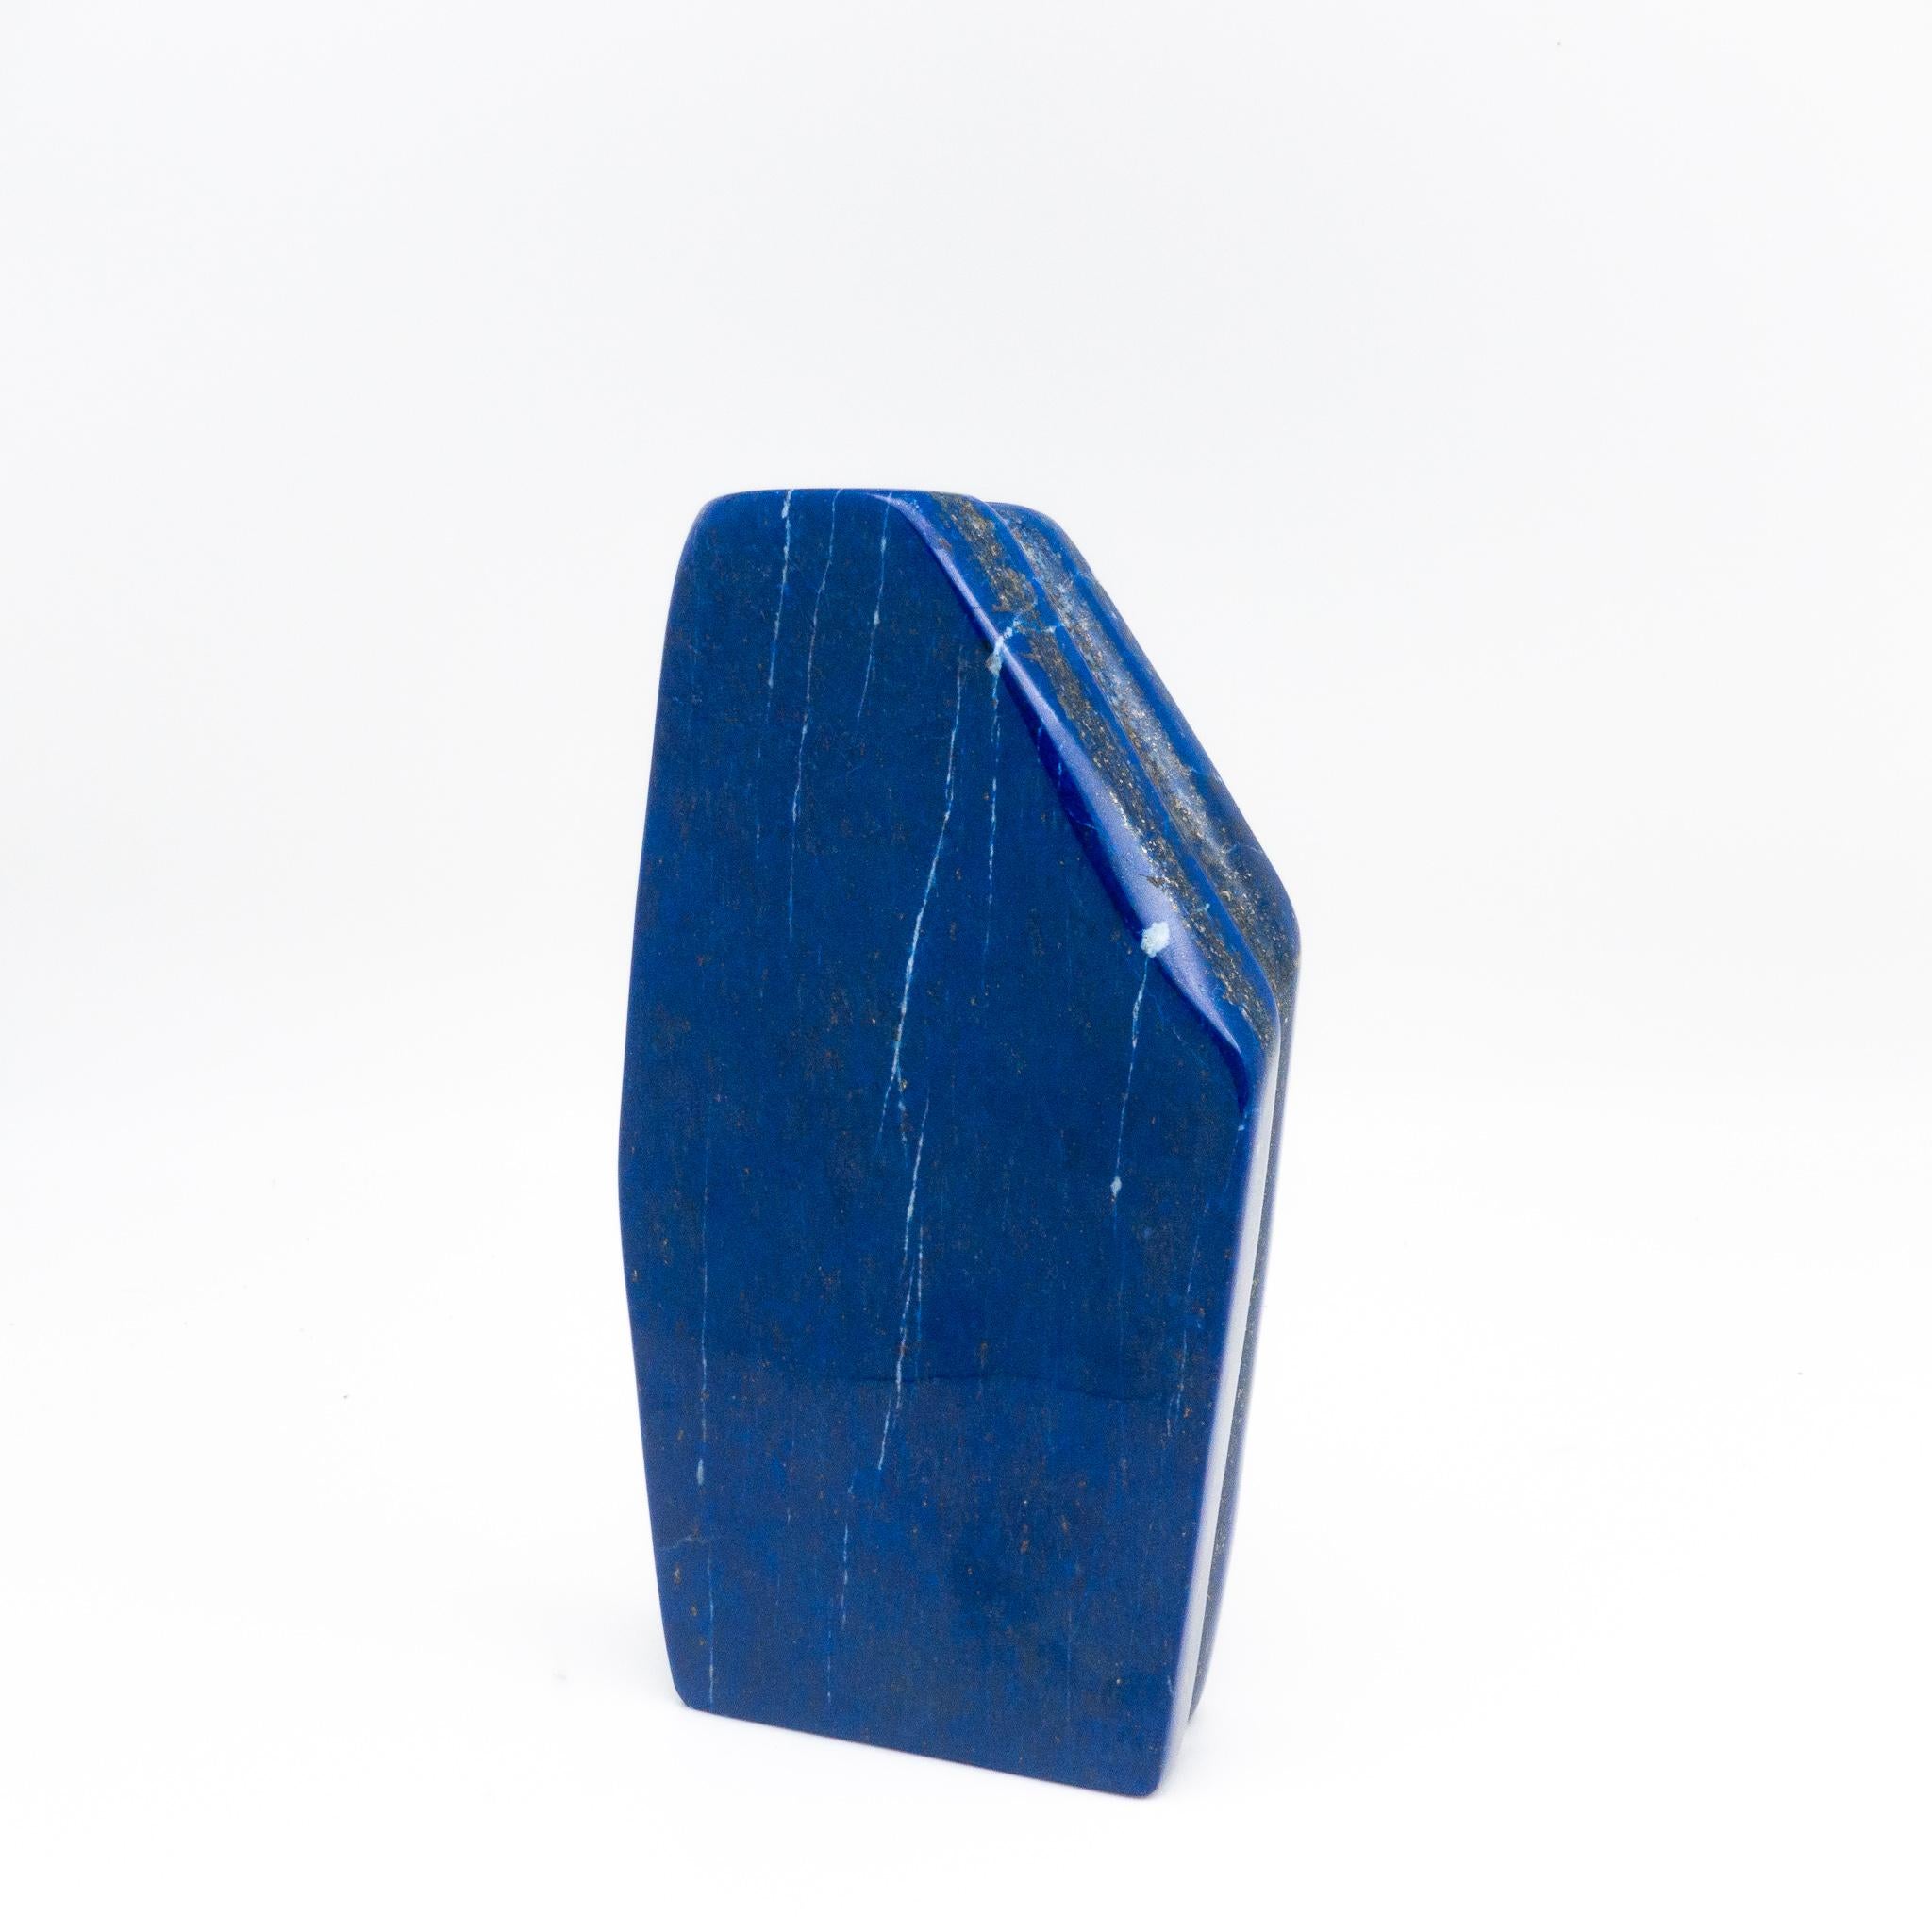 Beautifully polished lapis lazuli mineral specimen from Afghanistan. This semi-precious stone has been prized since antiquity due to its intense, beautiful blue coloring and golden speckles. It was also used in the fine arts, in a crushed powder